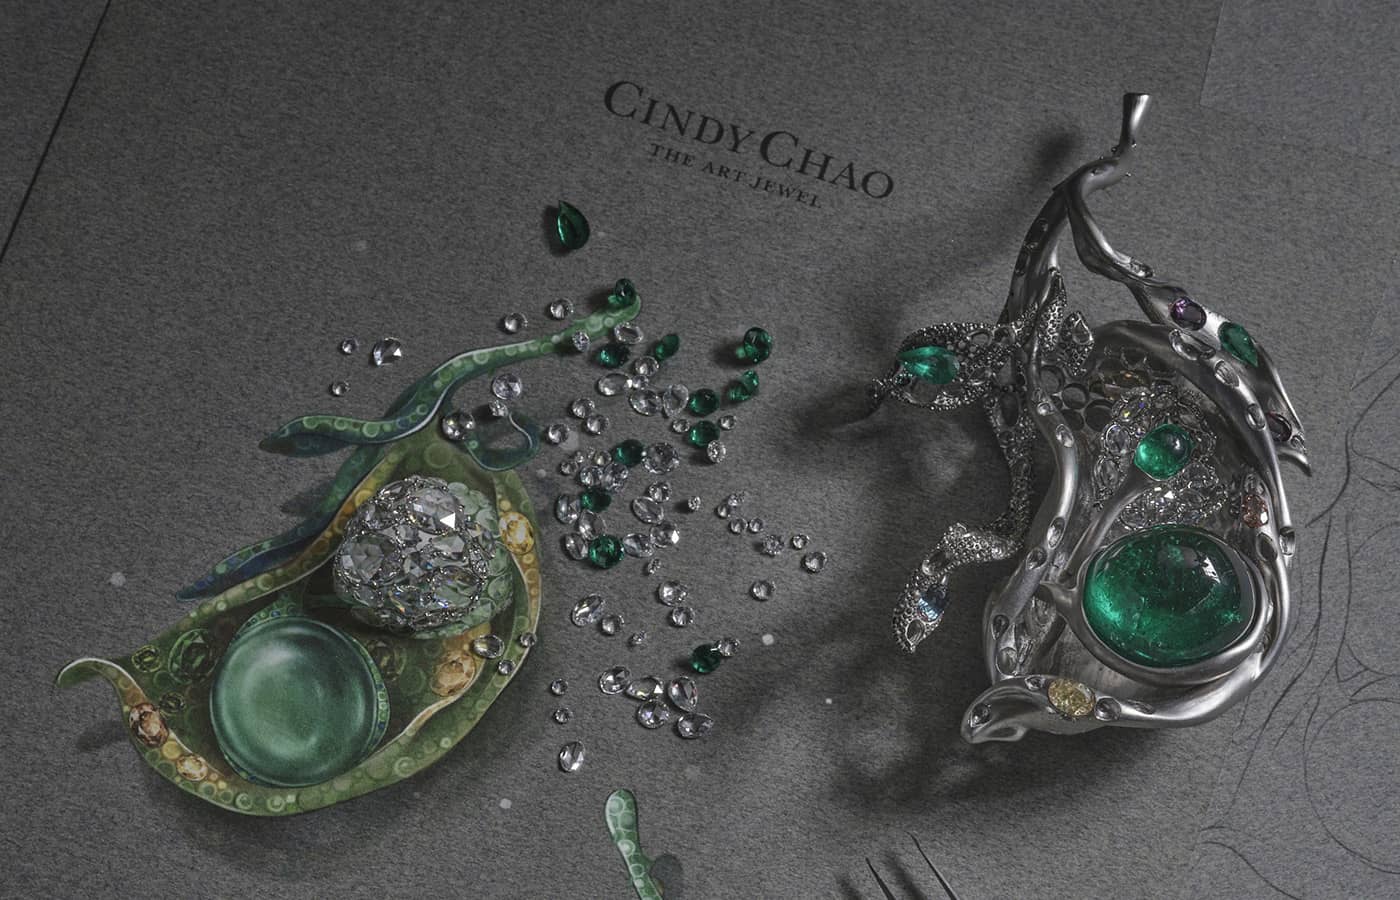 Making of the Cindy Chao The Art Jewel Cardamom brooch in titanium, emerald, diamond and coloured gemstones, from the Black Label Masterpiece High Jewellery collection